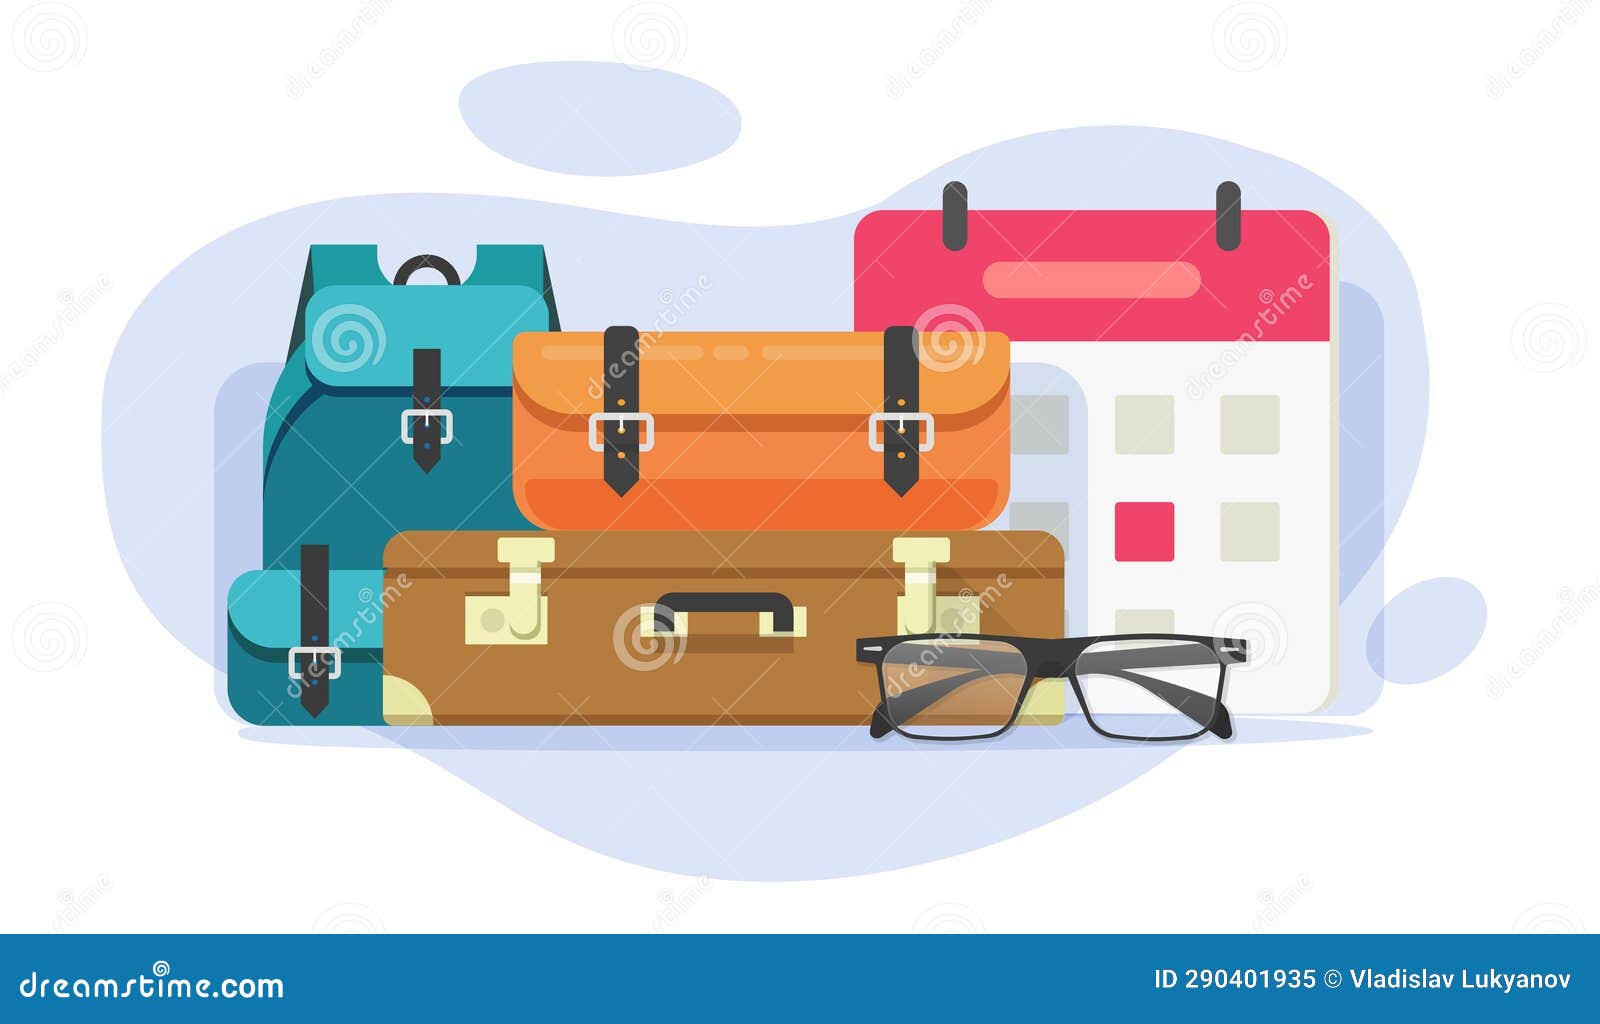 travel tour vacation calendar time concept  icon graphic , trip journey suitcase handbag baggage as scheduled